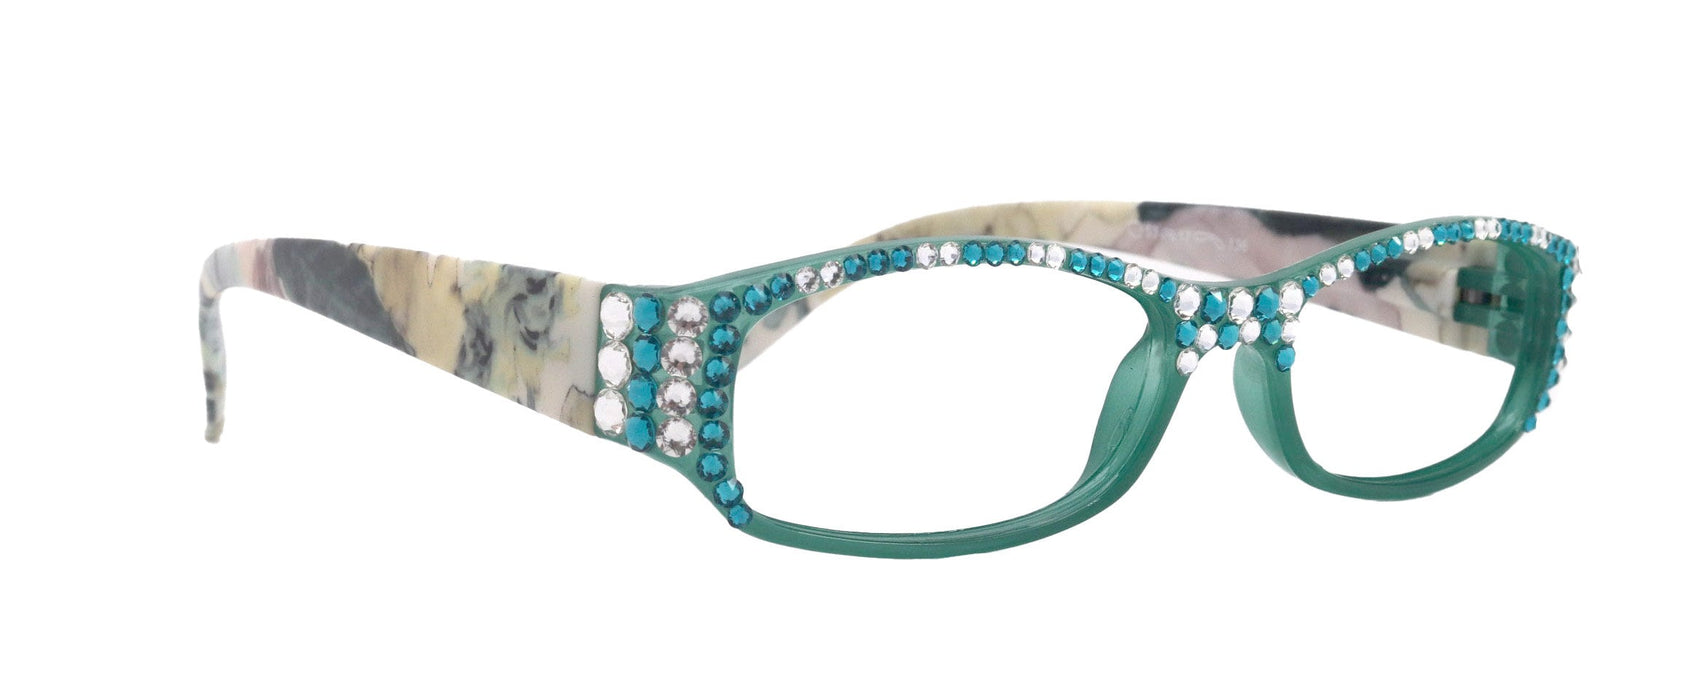 Rosie Bling Reading Glasses Women W (Clear N AB) Genuine European Crystals (Turquoise / Green) NY Fifth Avenue